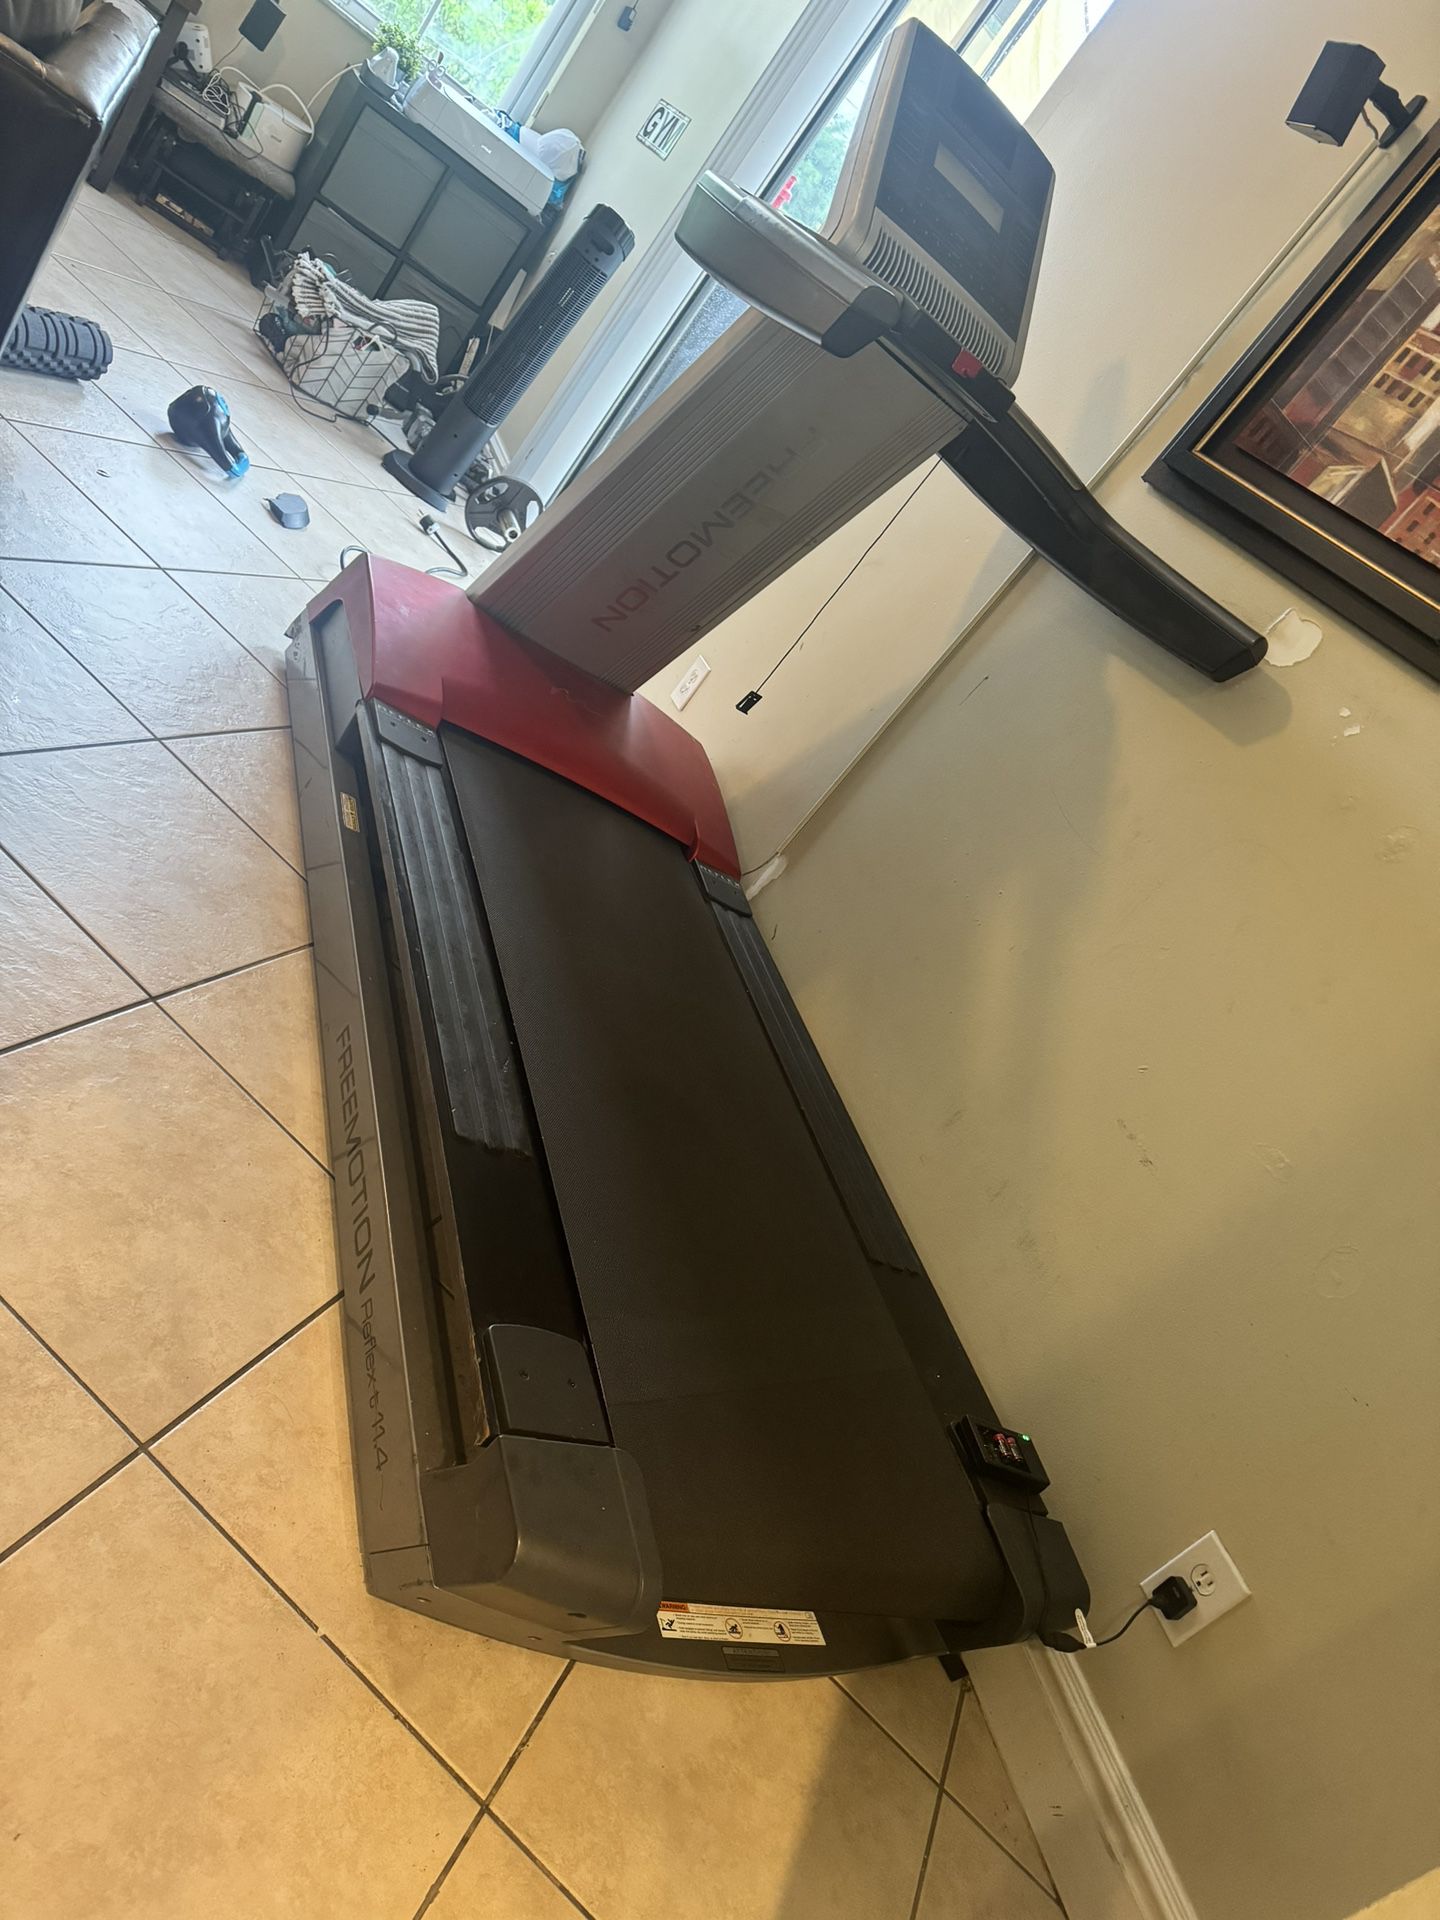 Commercial Gym Treadmill! Best Deal!